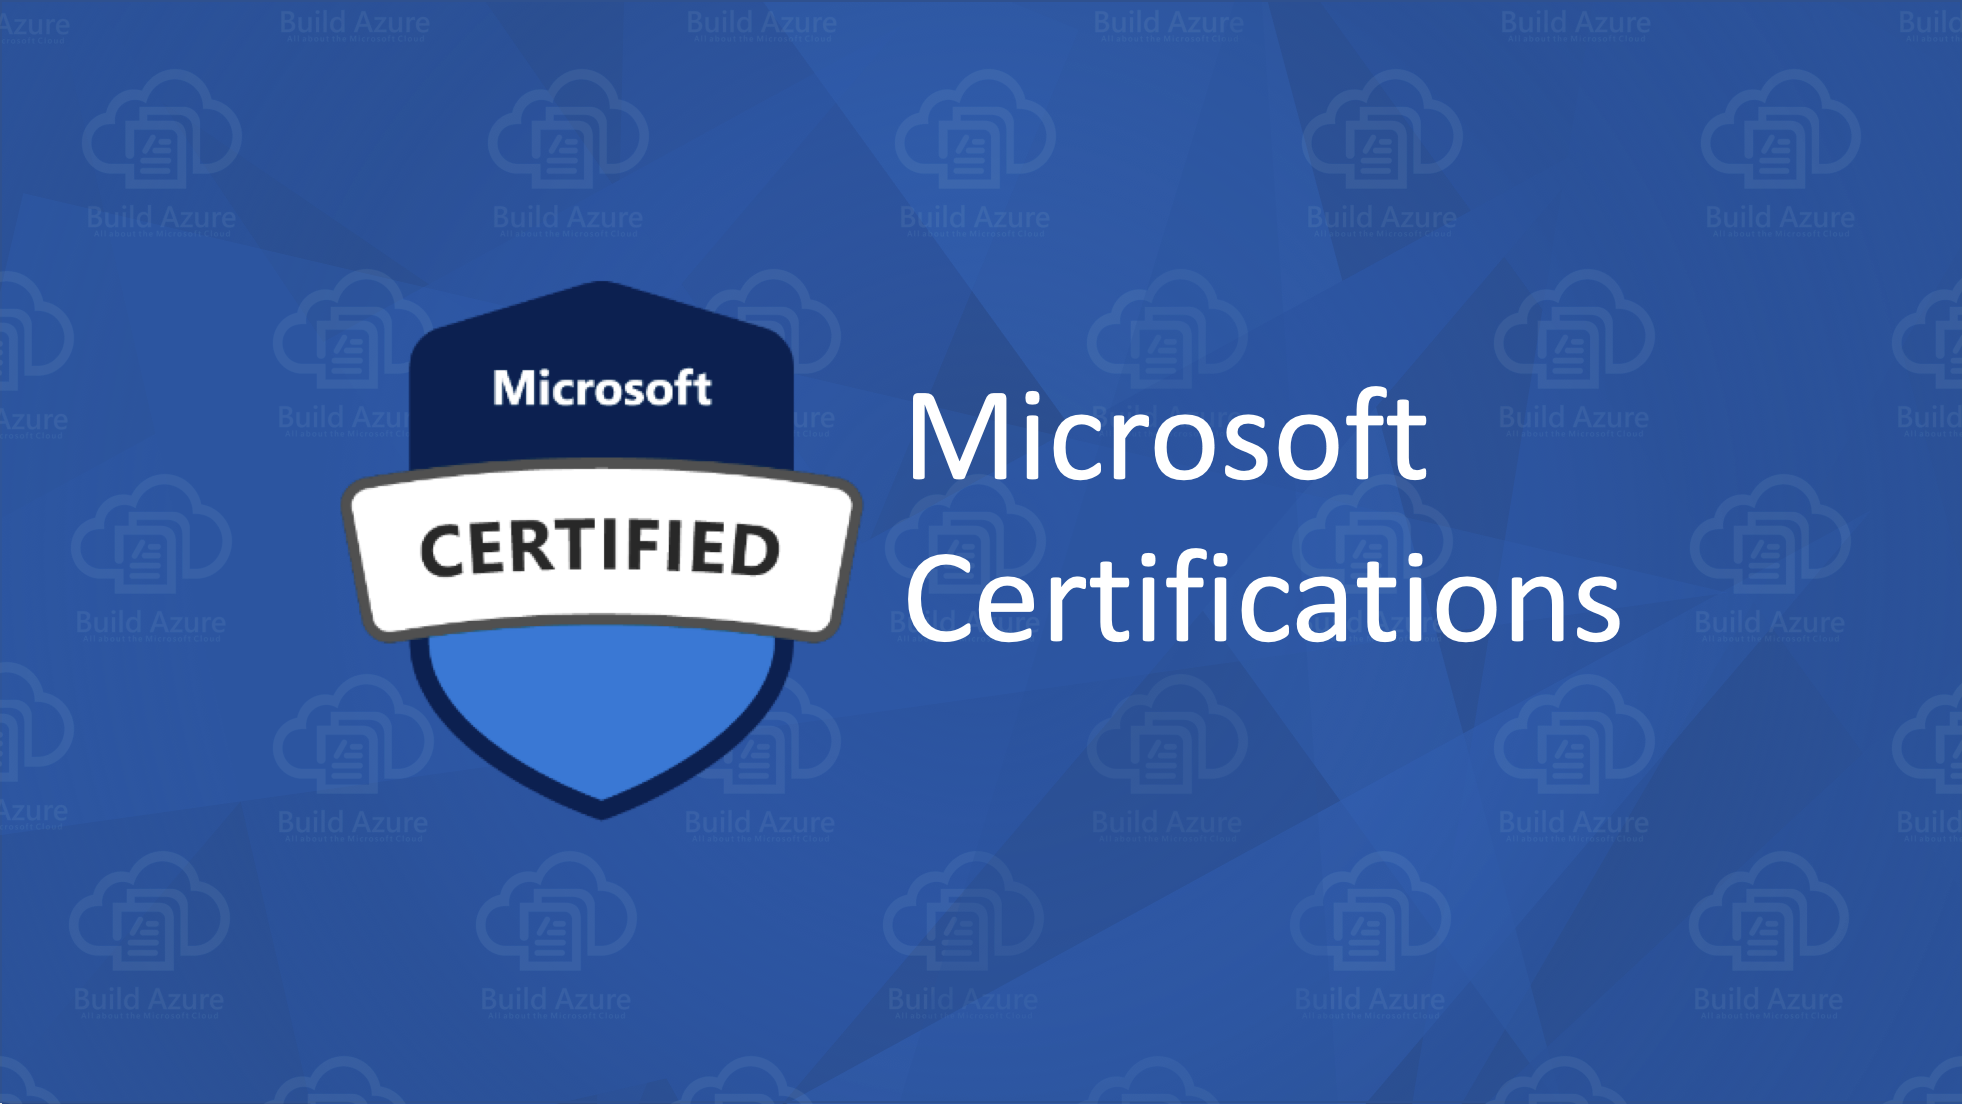 How Much Does Microsoft Certification Cost?